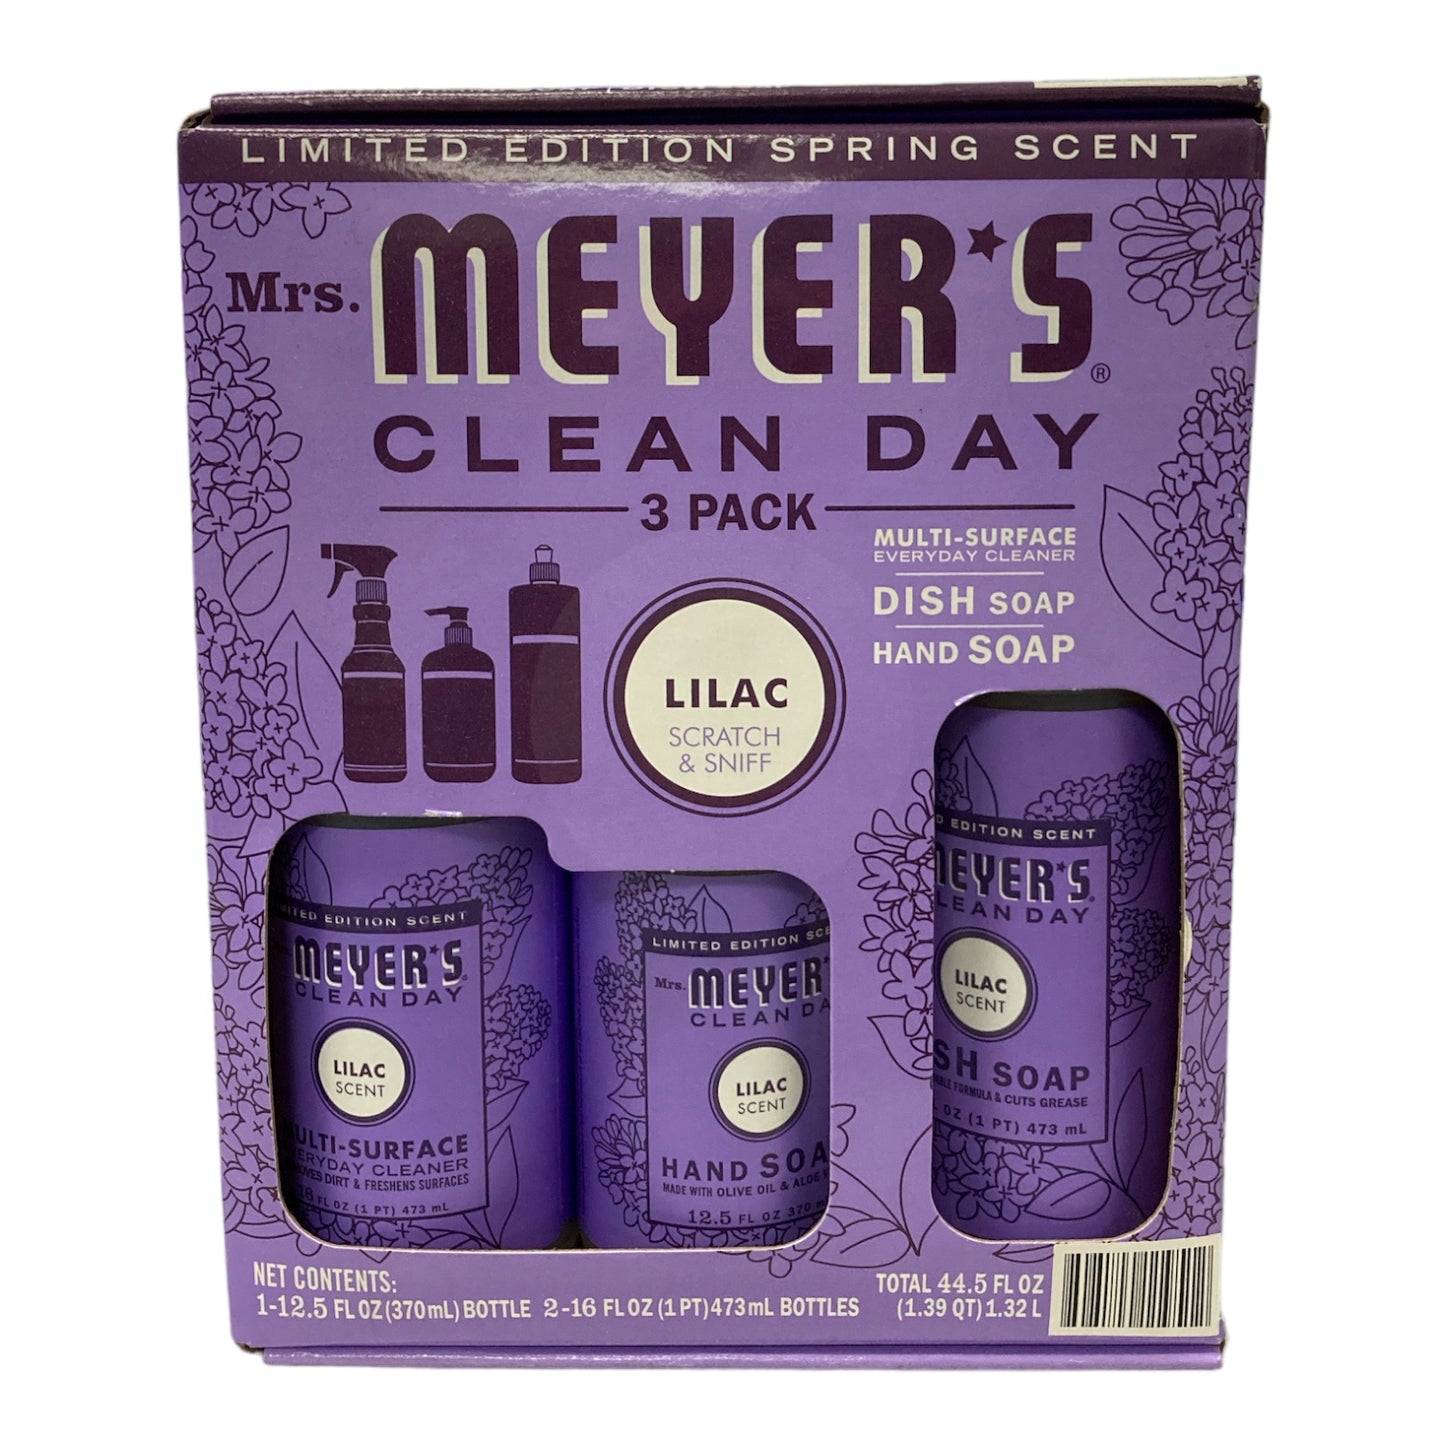 Mrs. Meyer's Clean Day Three Pack Liquid Soap and Multi-Surface Cleaner (Lilac)